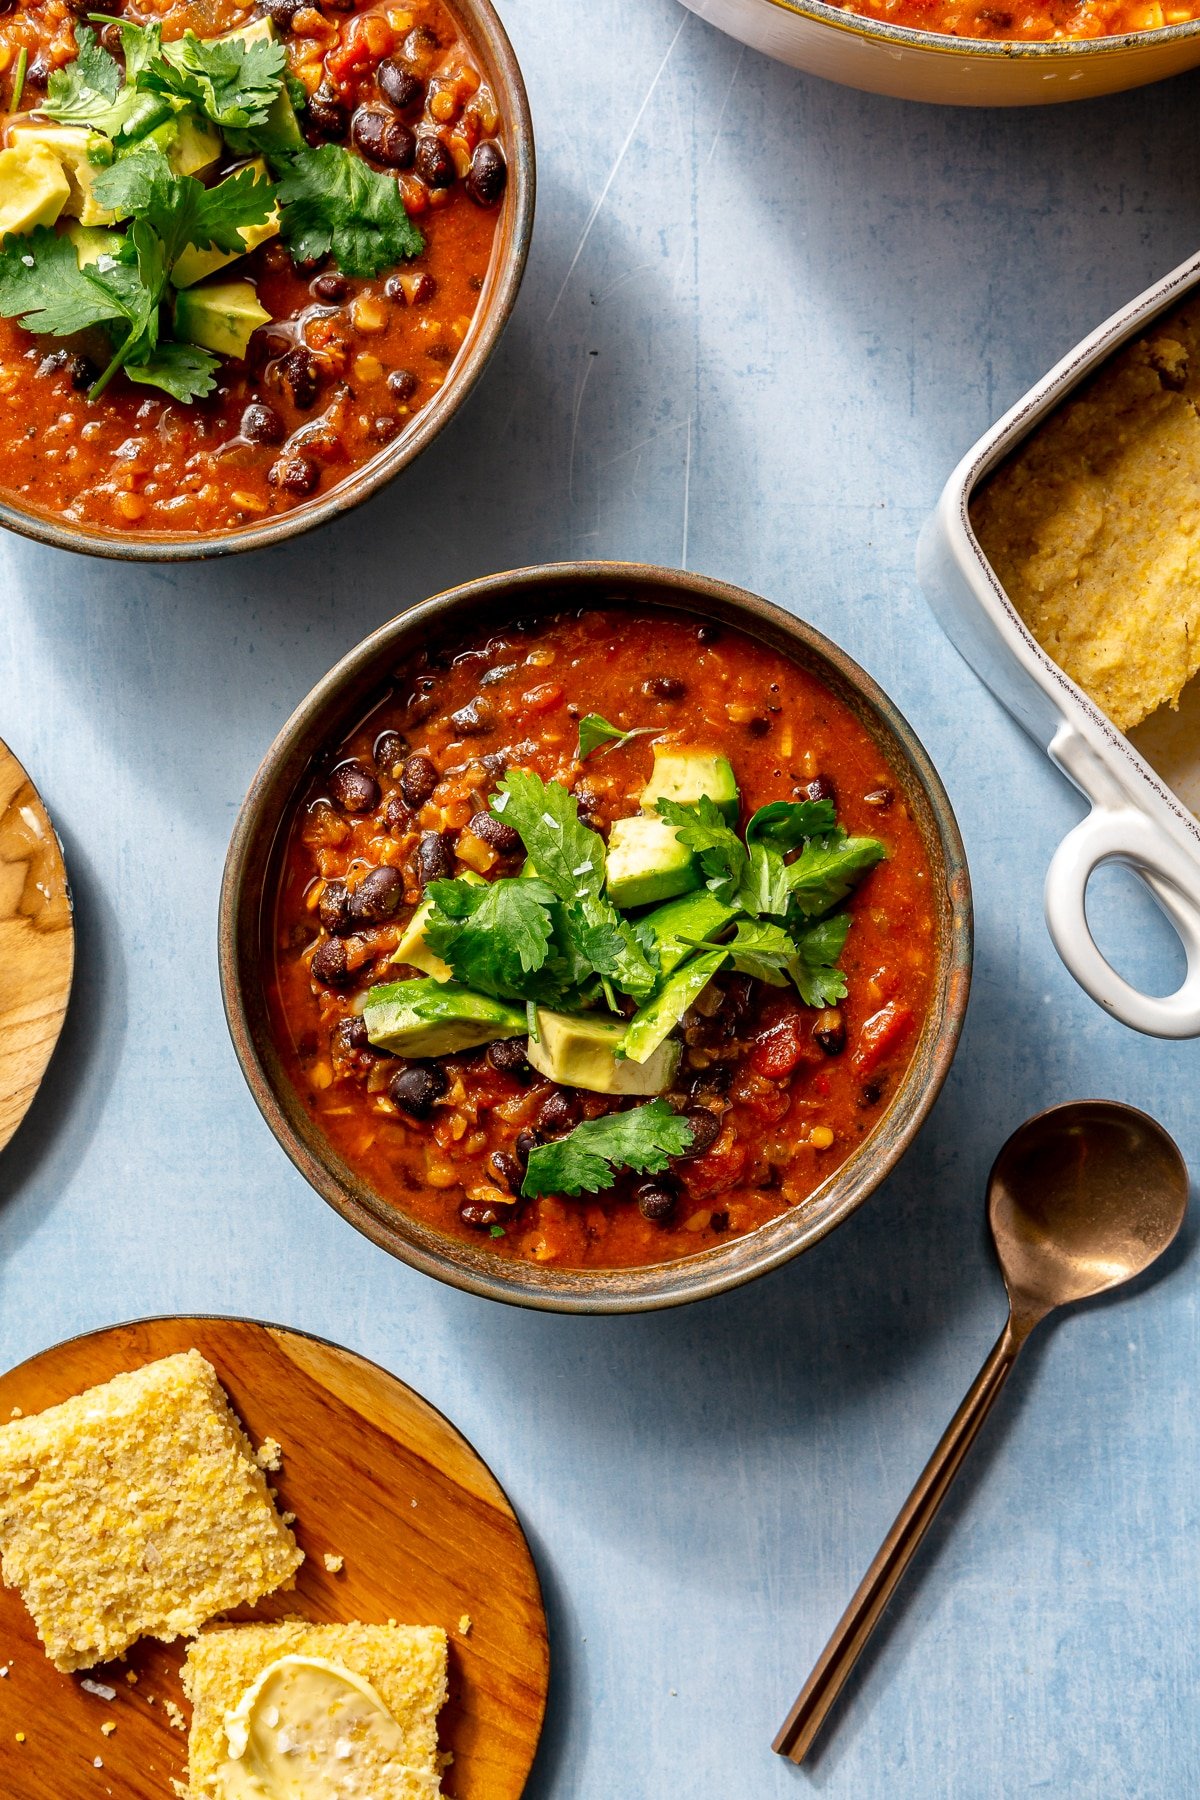 A single serving of chili sits in a brown bowl on a blue countertop. It has been garnished with cilantro and diced avocado. A plate of cornbread and a copper spoon sit to the side.